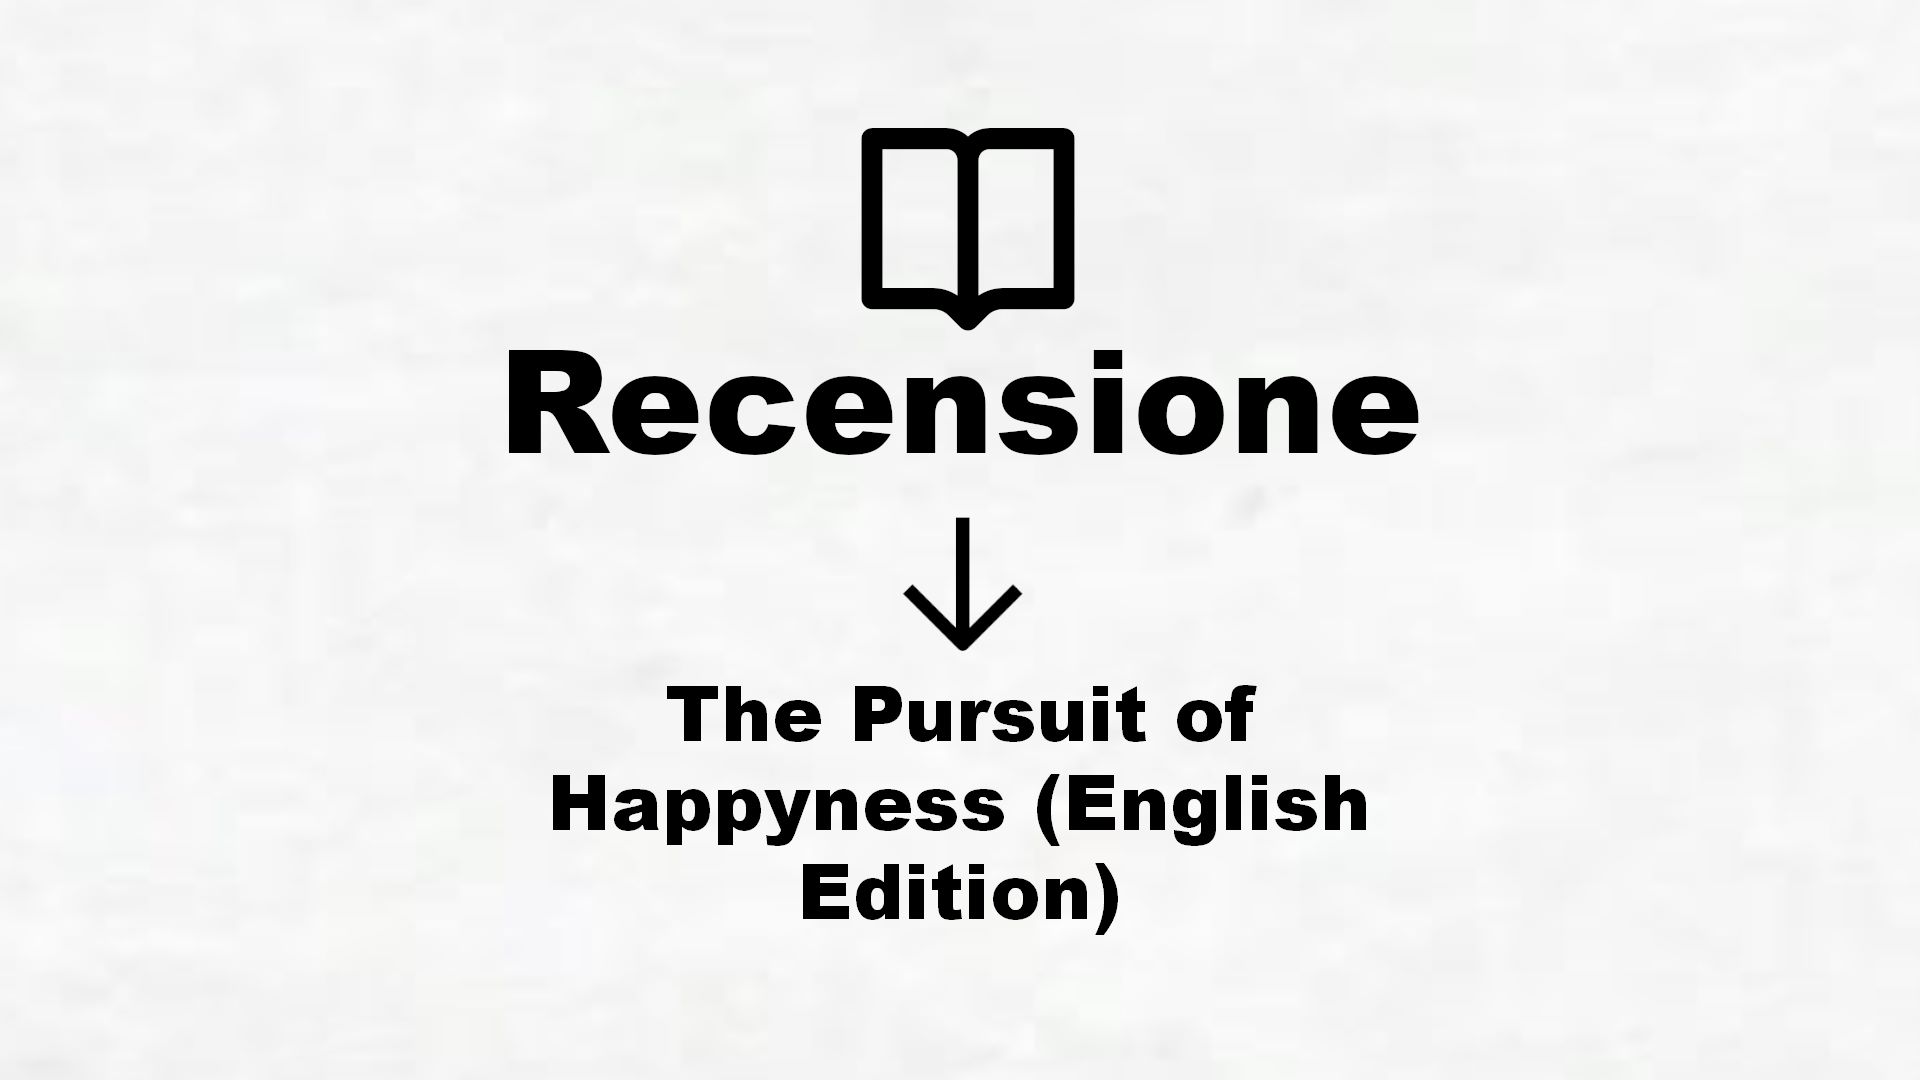 The Pursuit of Happyness (English Edition) – Recensione Libro